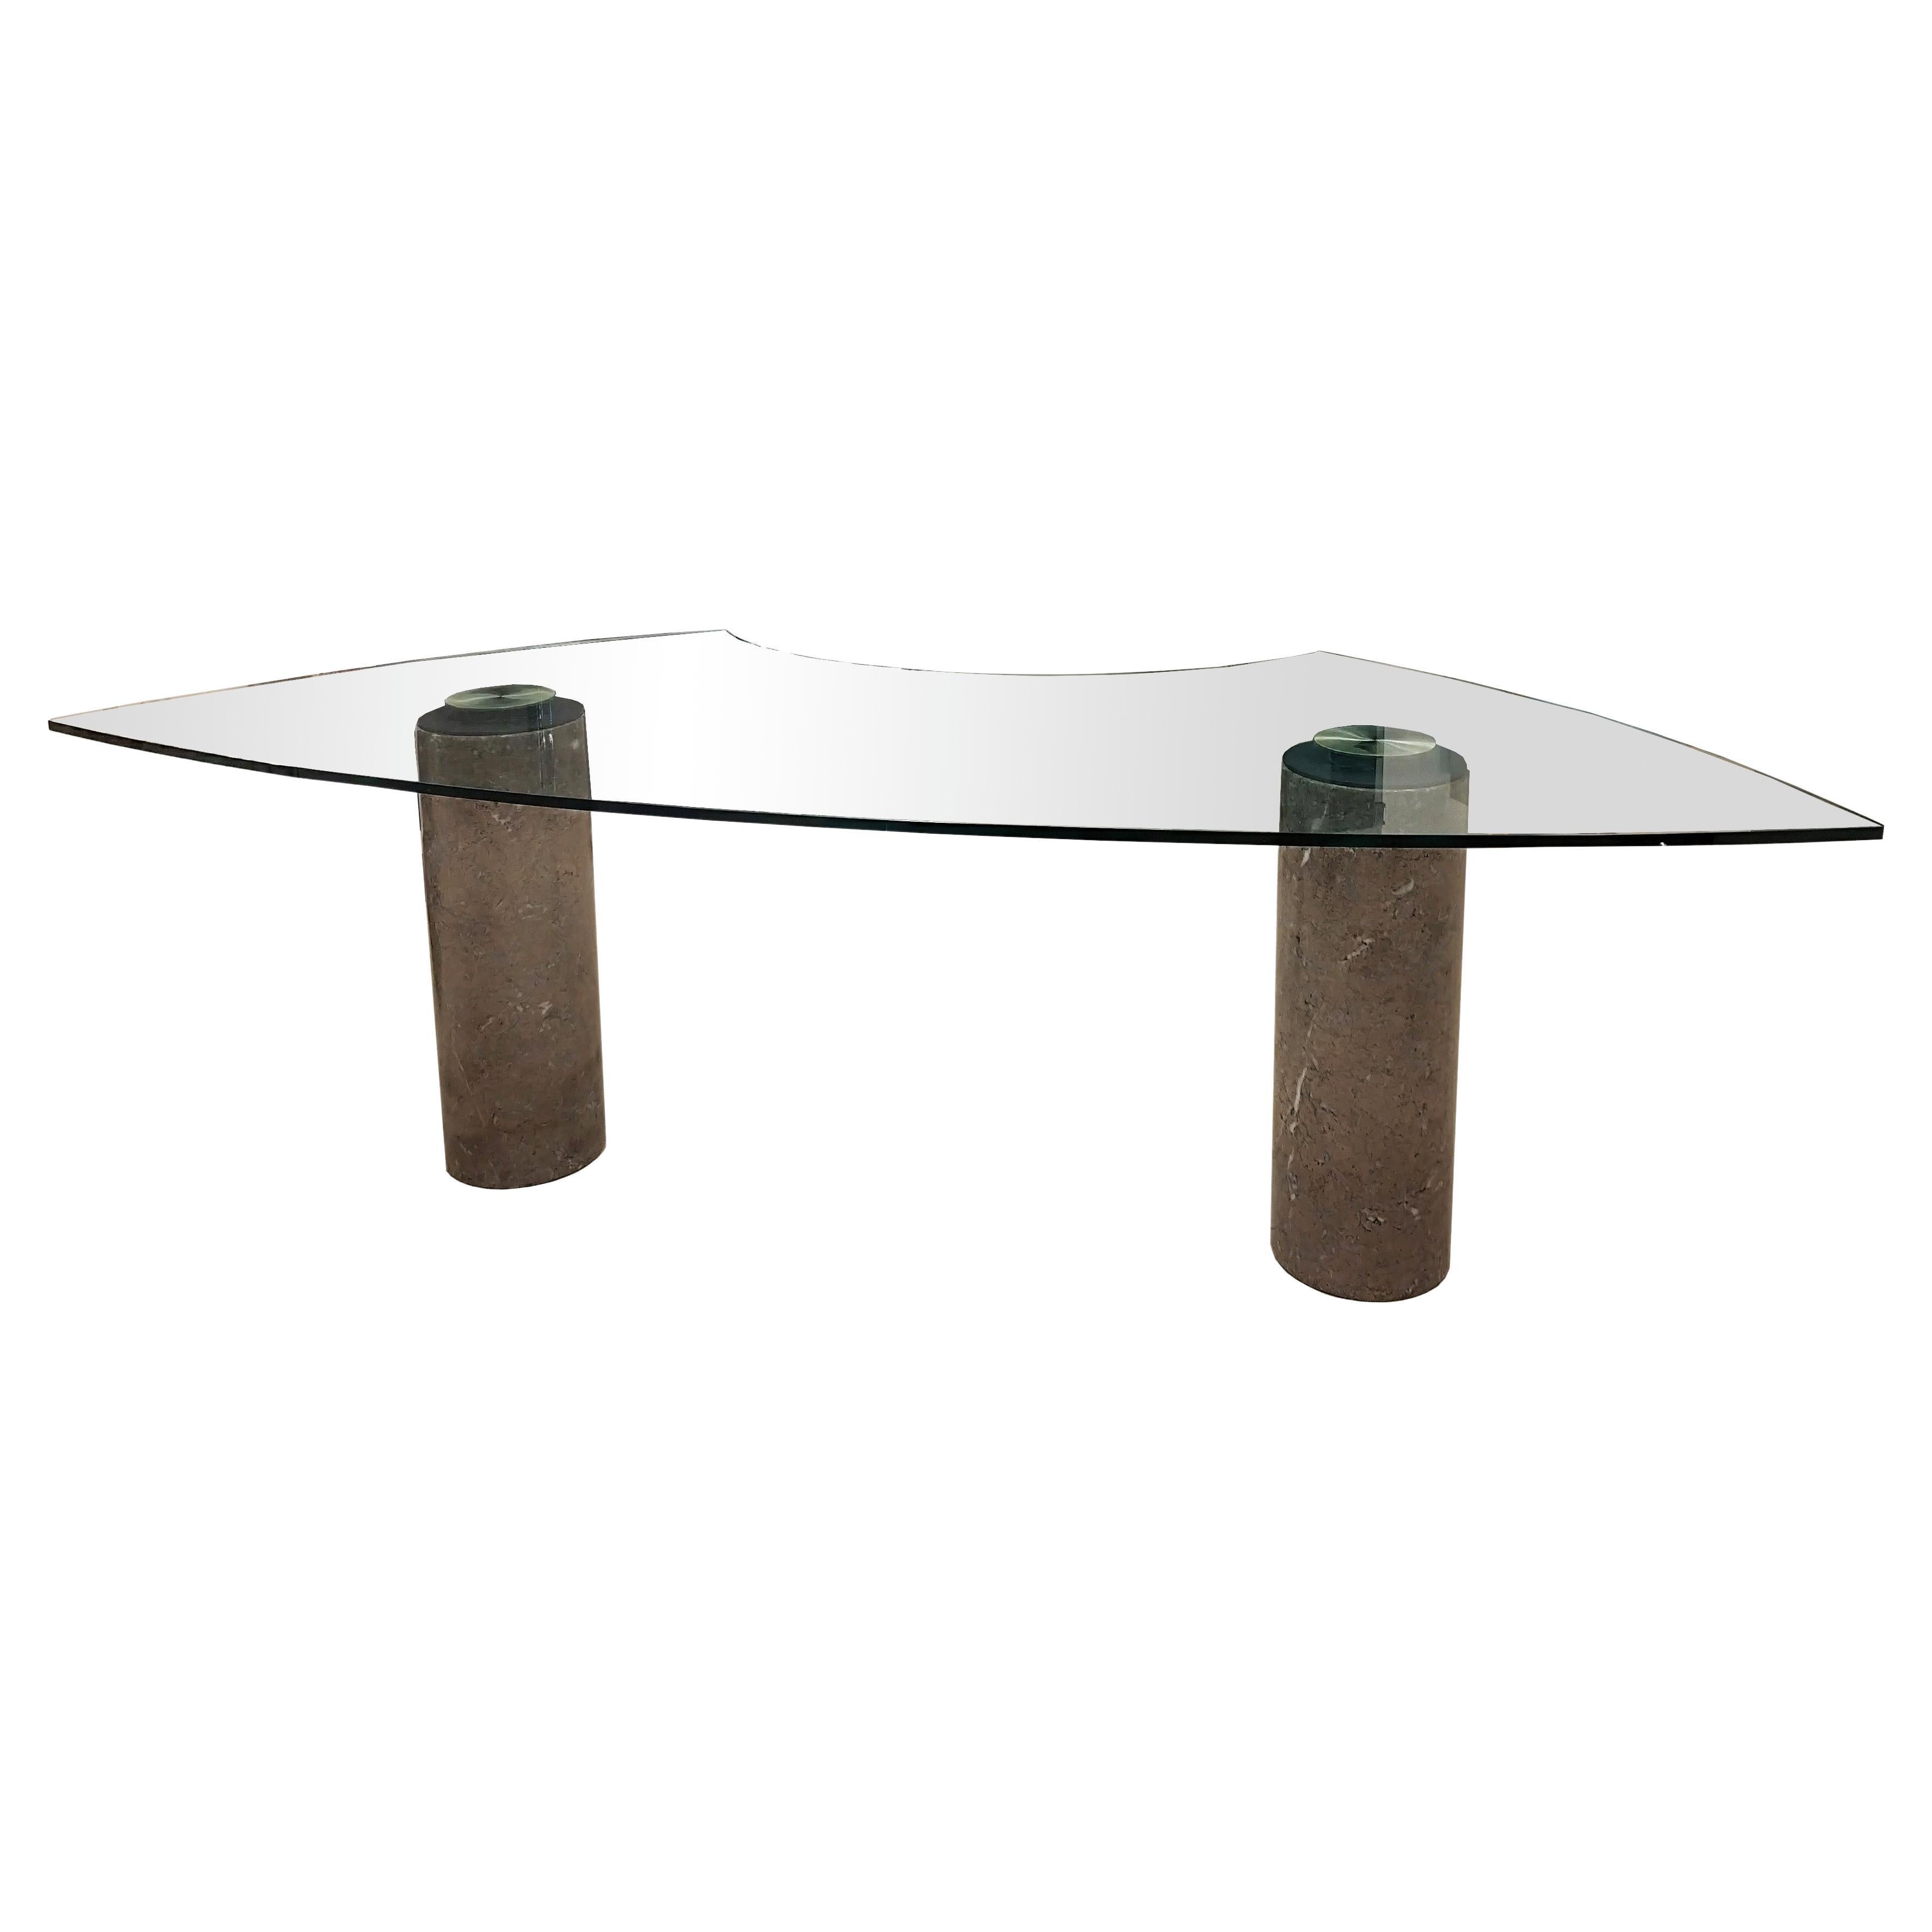 Angelo Mangiarotti for Skipper M4 Series Glass and Marble Desk, Italy 1985